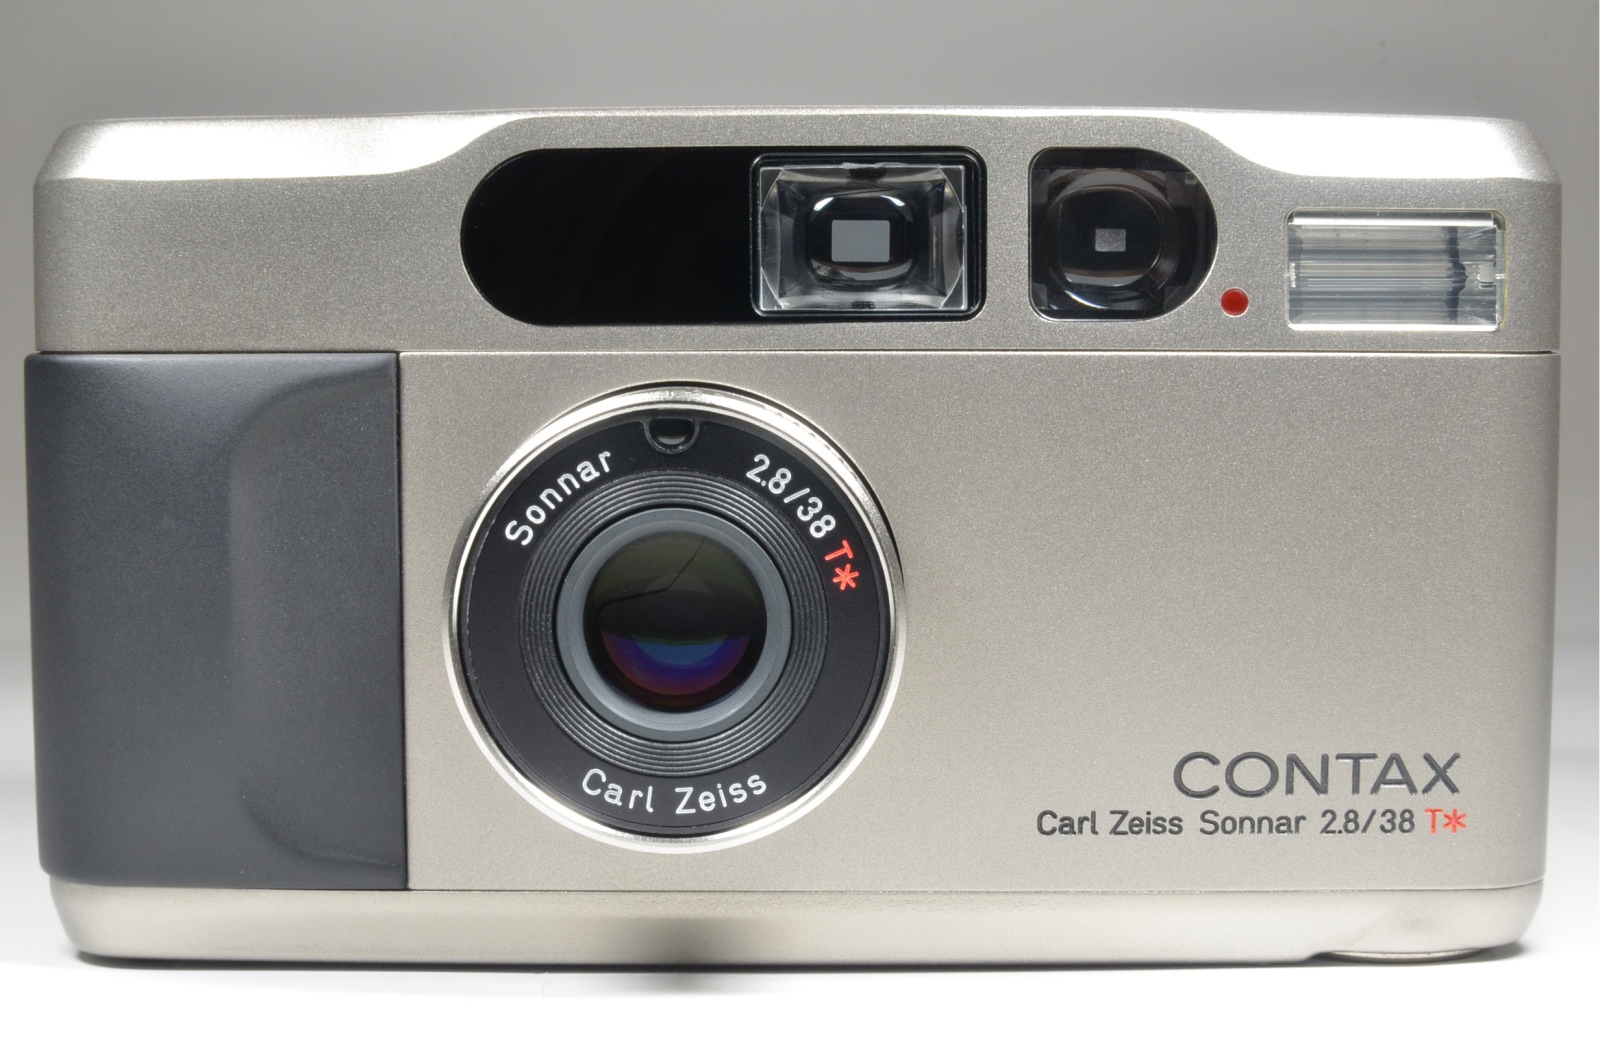 contax t2 point & shoot 35mm film camera